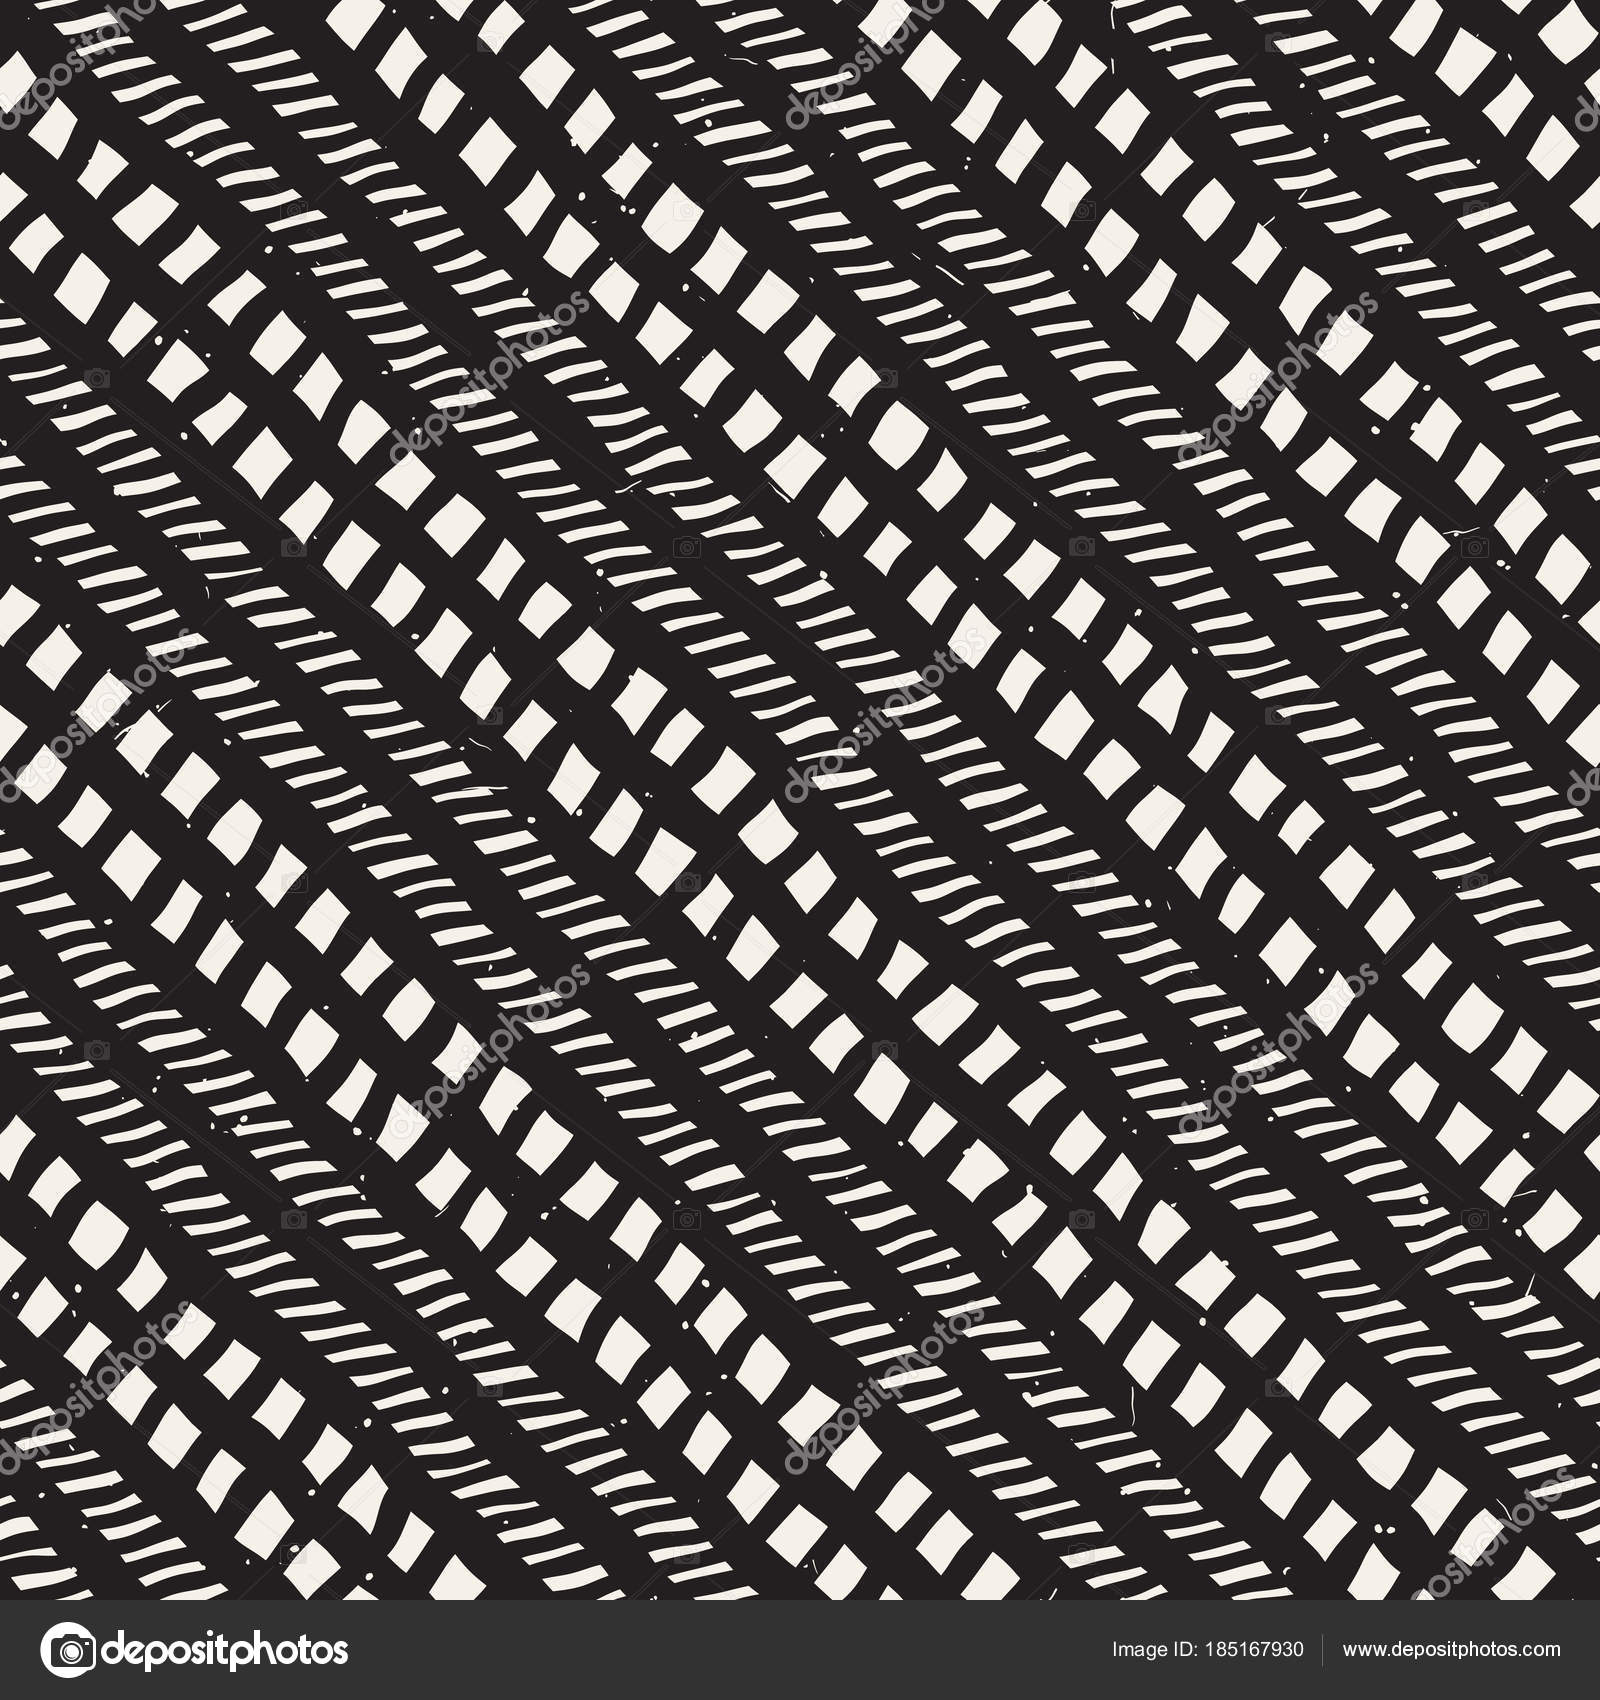 Simple ink geometric pattern. Monochrome black and white strokes ...